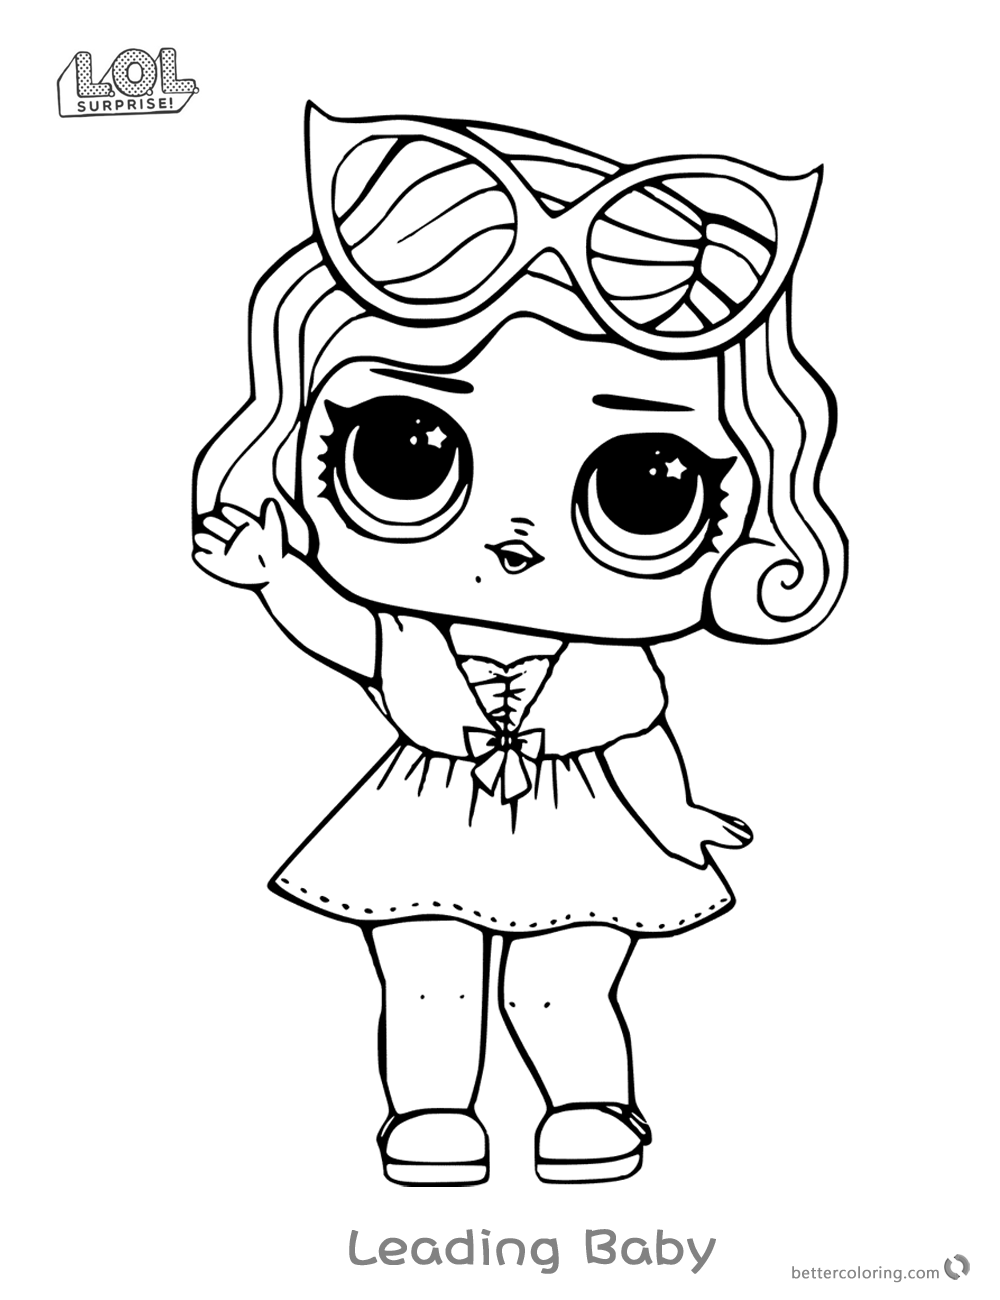 Leading Baby From Lol Surprise Doll Coloring Pages - Free Printable